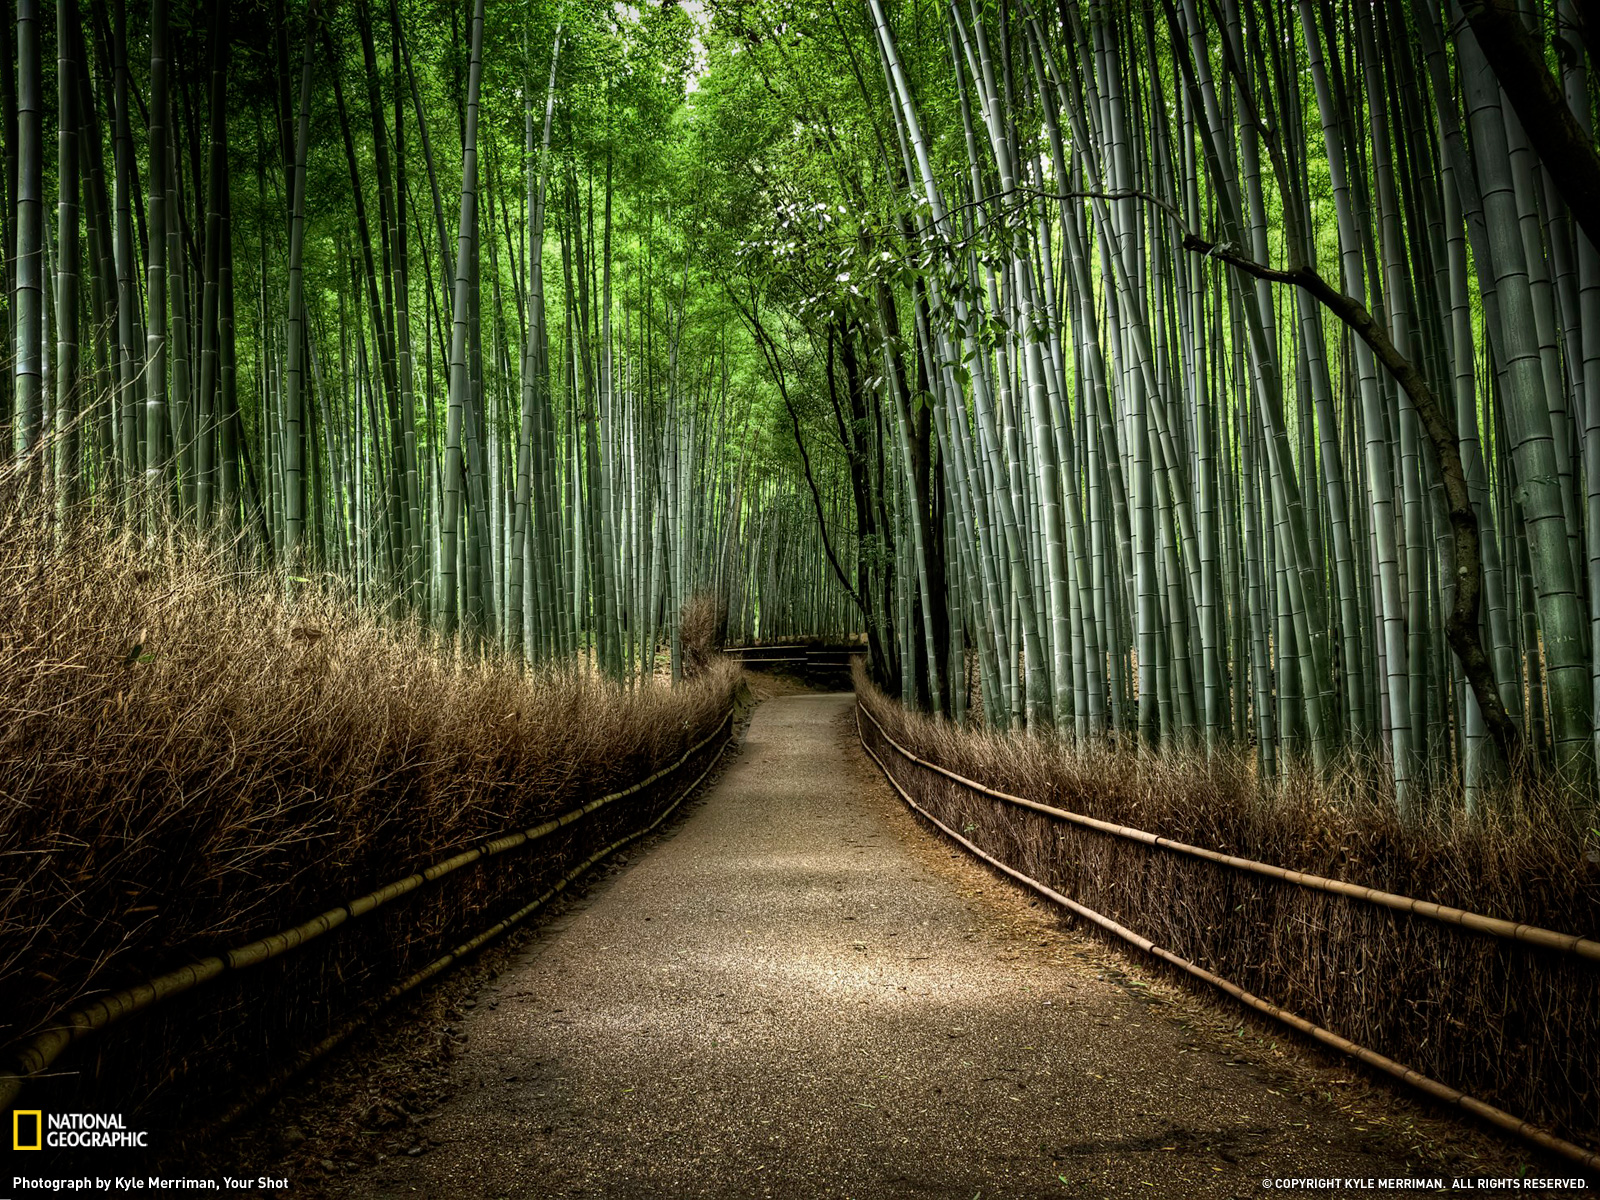 Bamboo Forest Photo Nature Wallpaper National Geographic Photo of